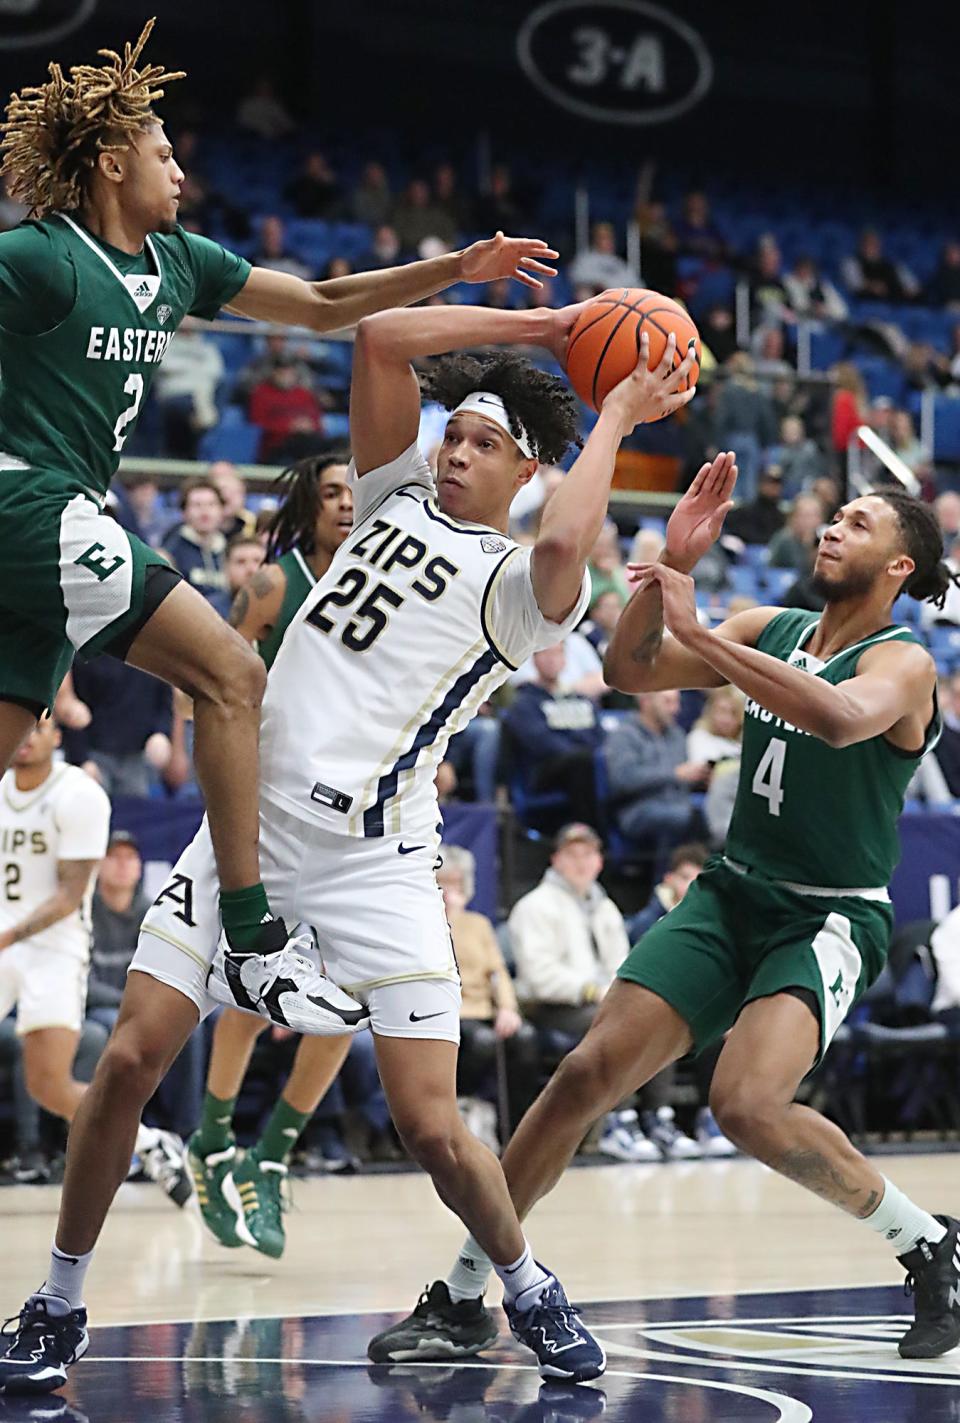 Akron's Enrique Freeman secures the ball against Eastern Michigan's Noah Farrakhan and Jalin Billingsley during the 2022-23 season.